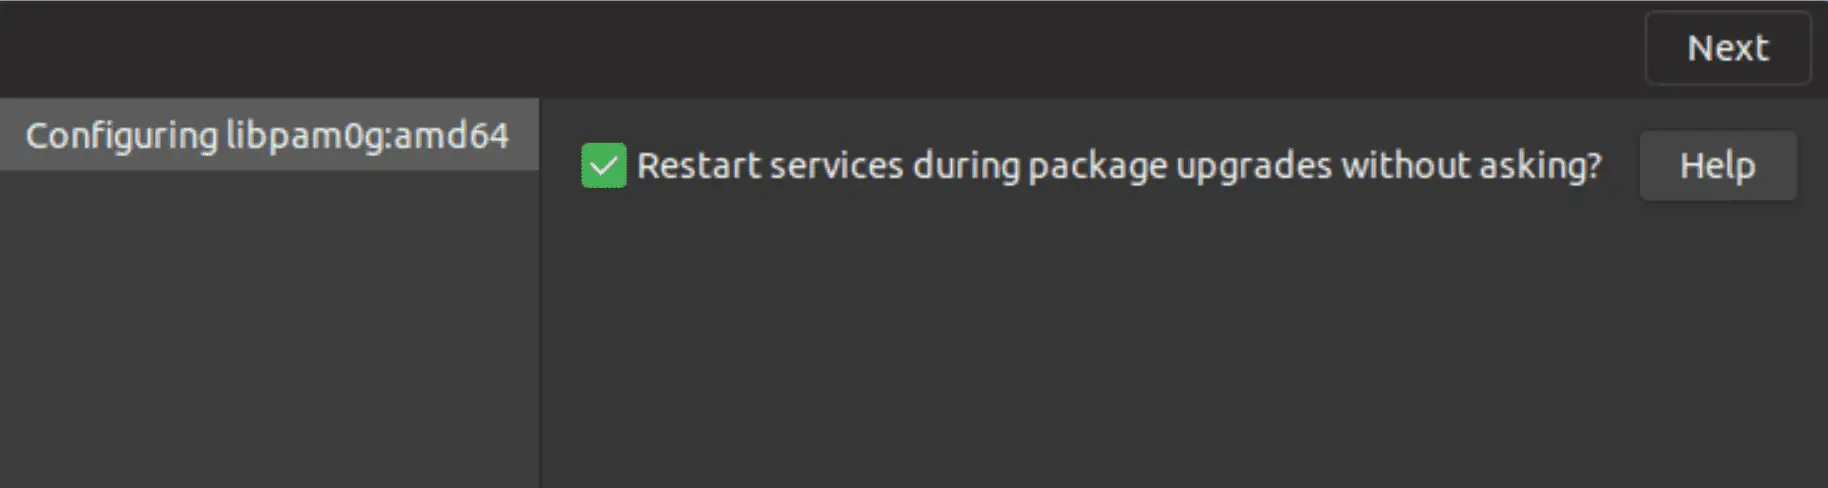 restart services during package upgrade without asking